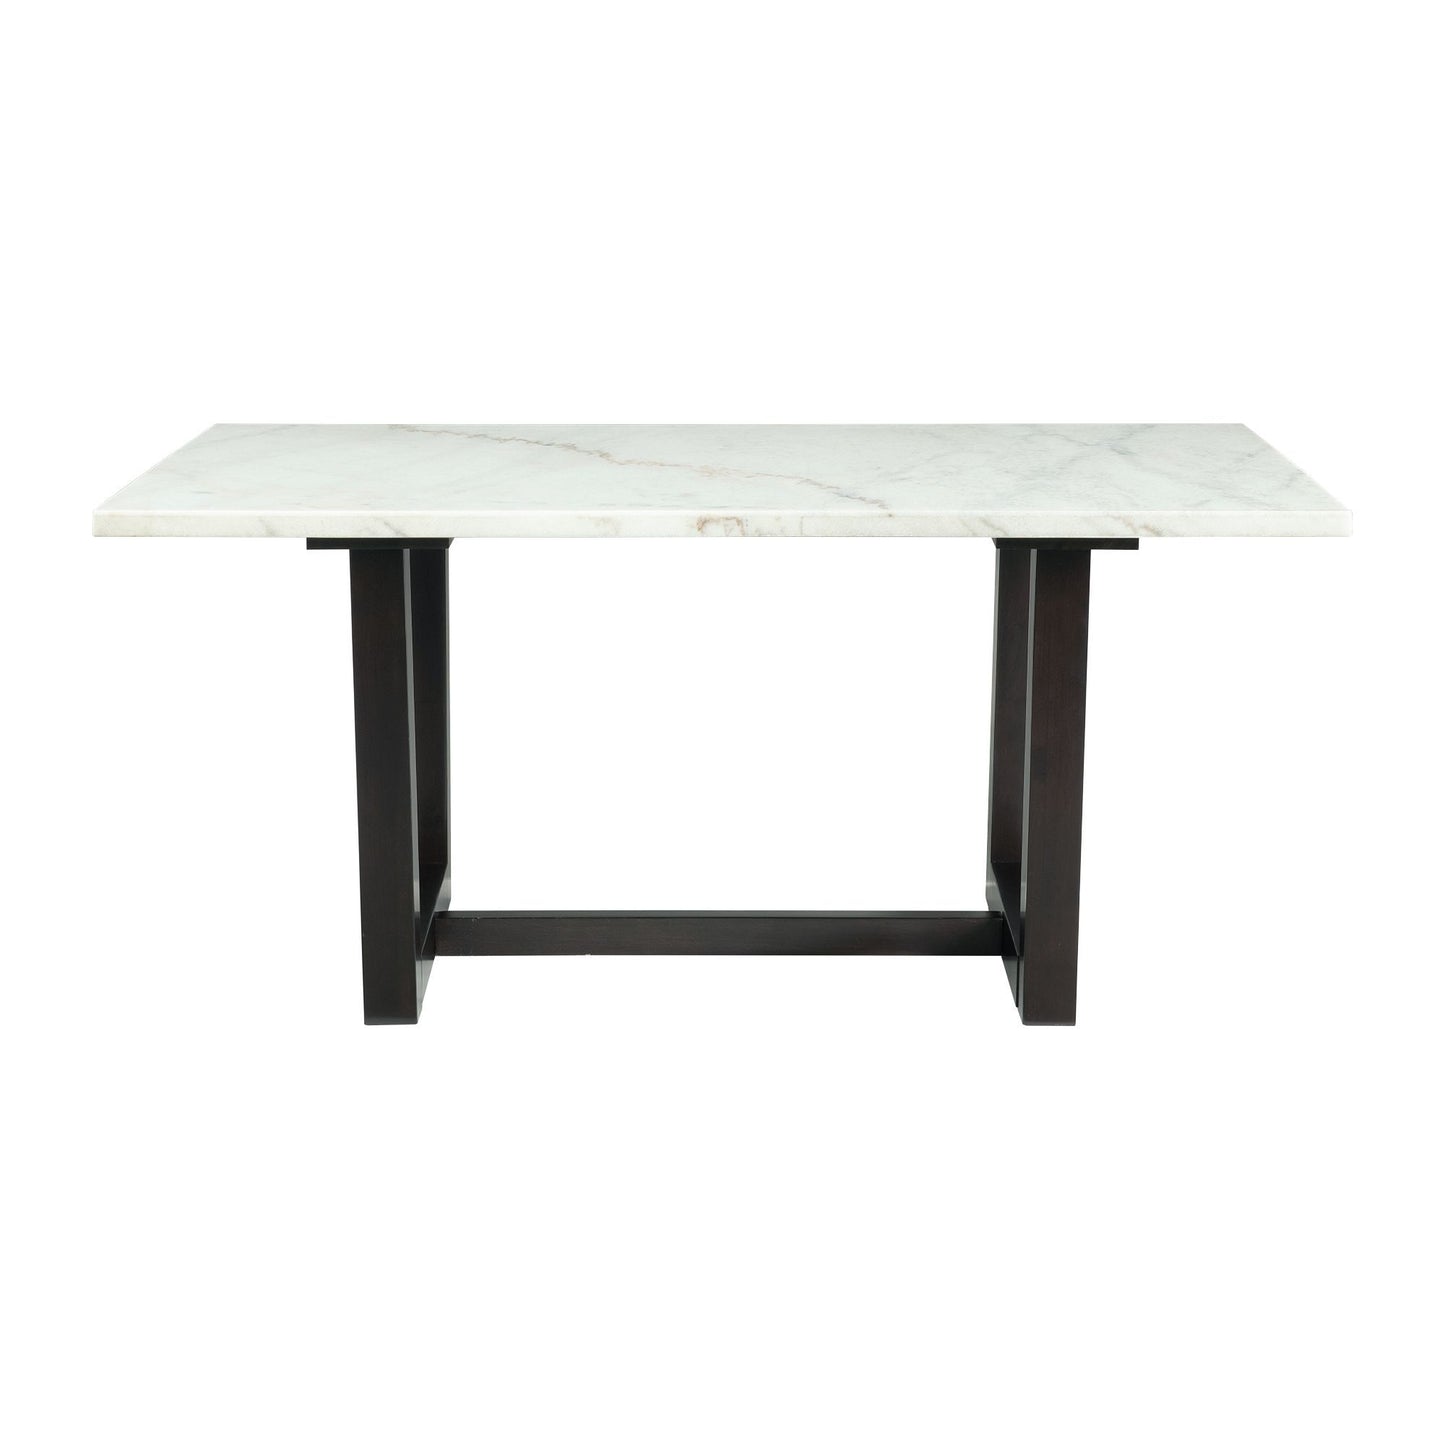 Felicia - Dining Table With White Marble Top - Dark